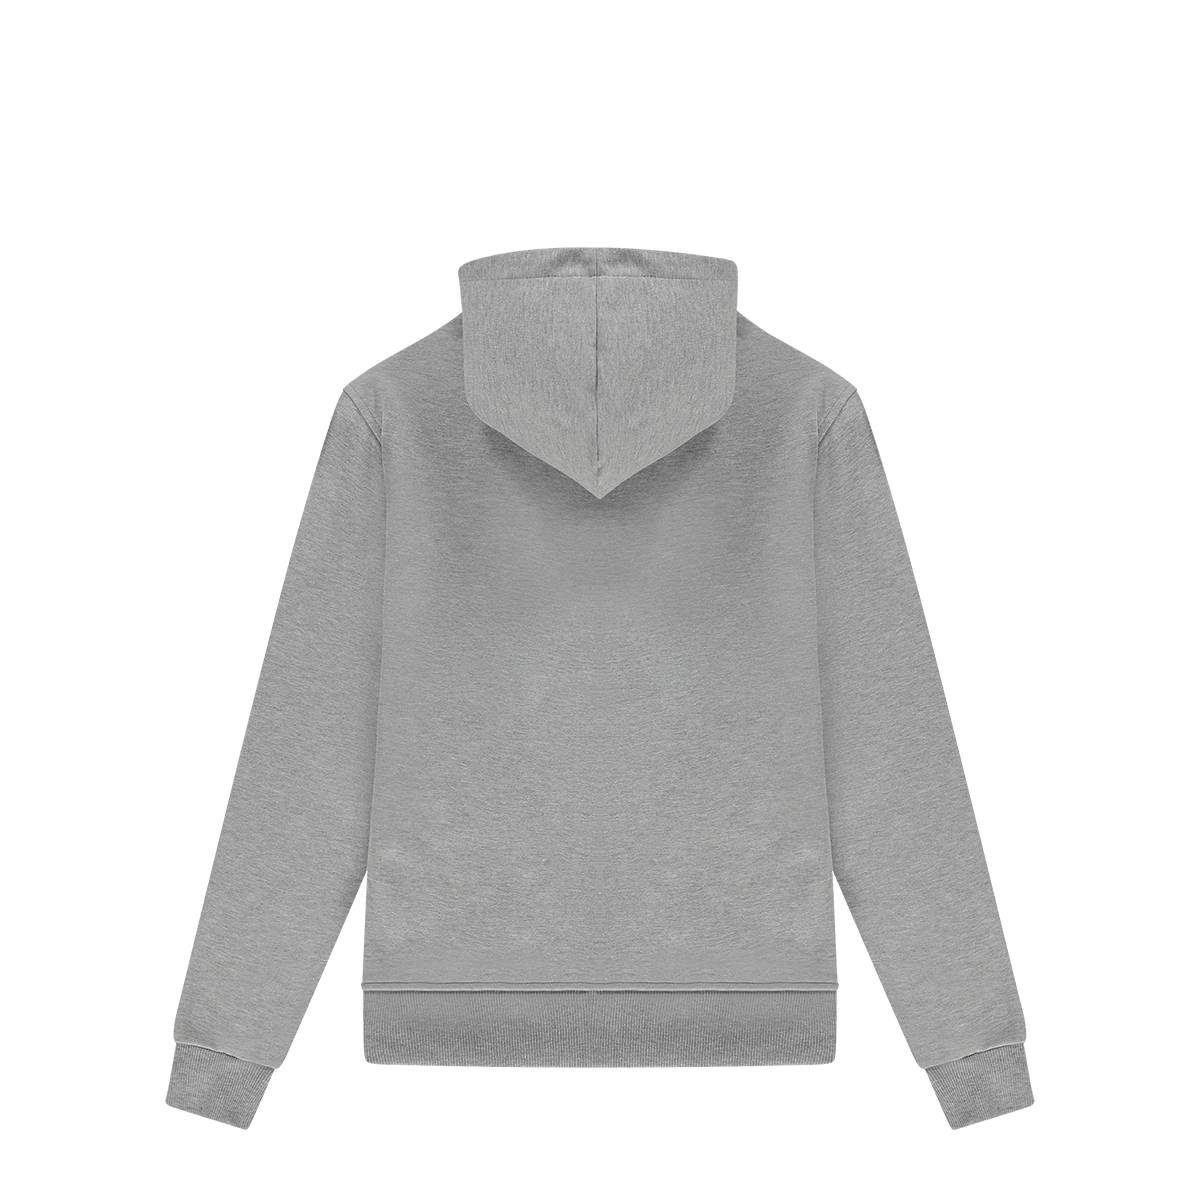 Afrojack_official-hoodie-grey-back